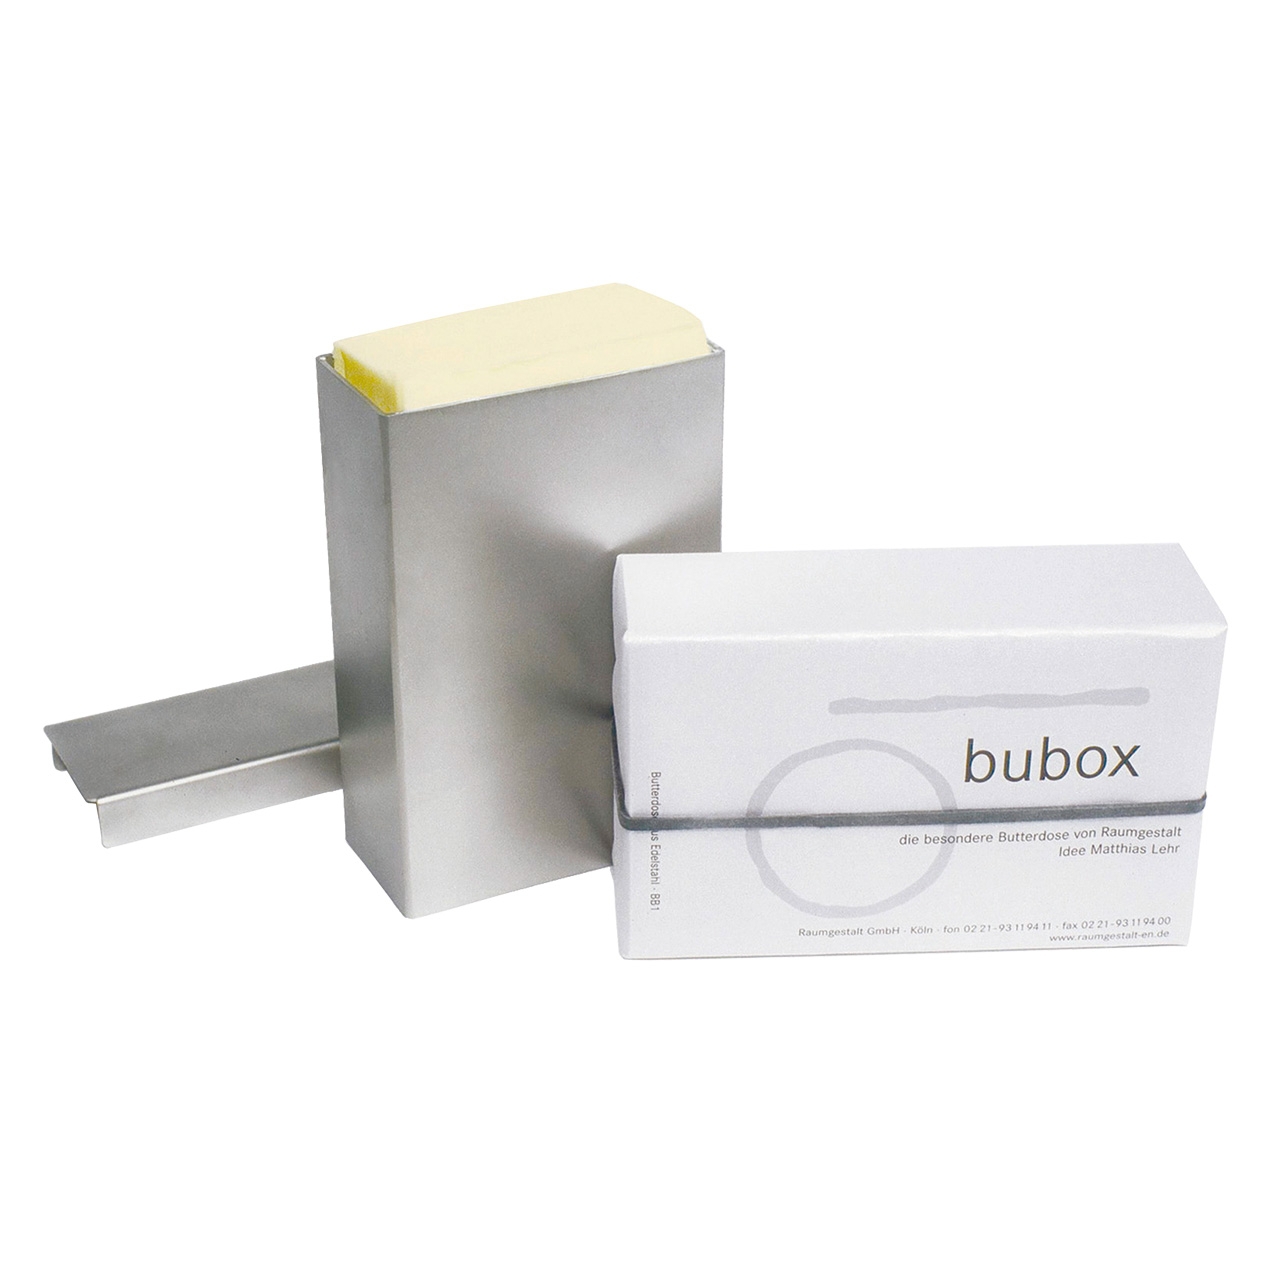 Bubox – butter box made of stainless steel